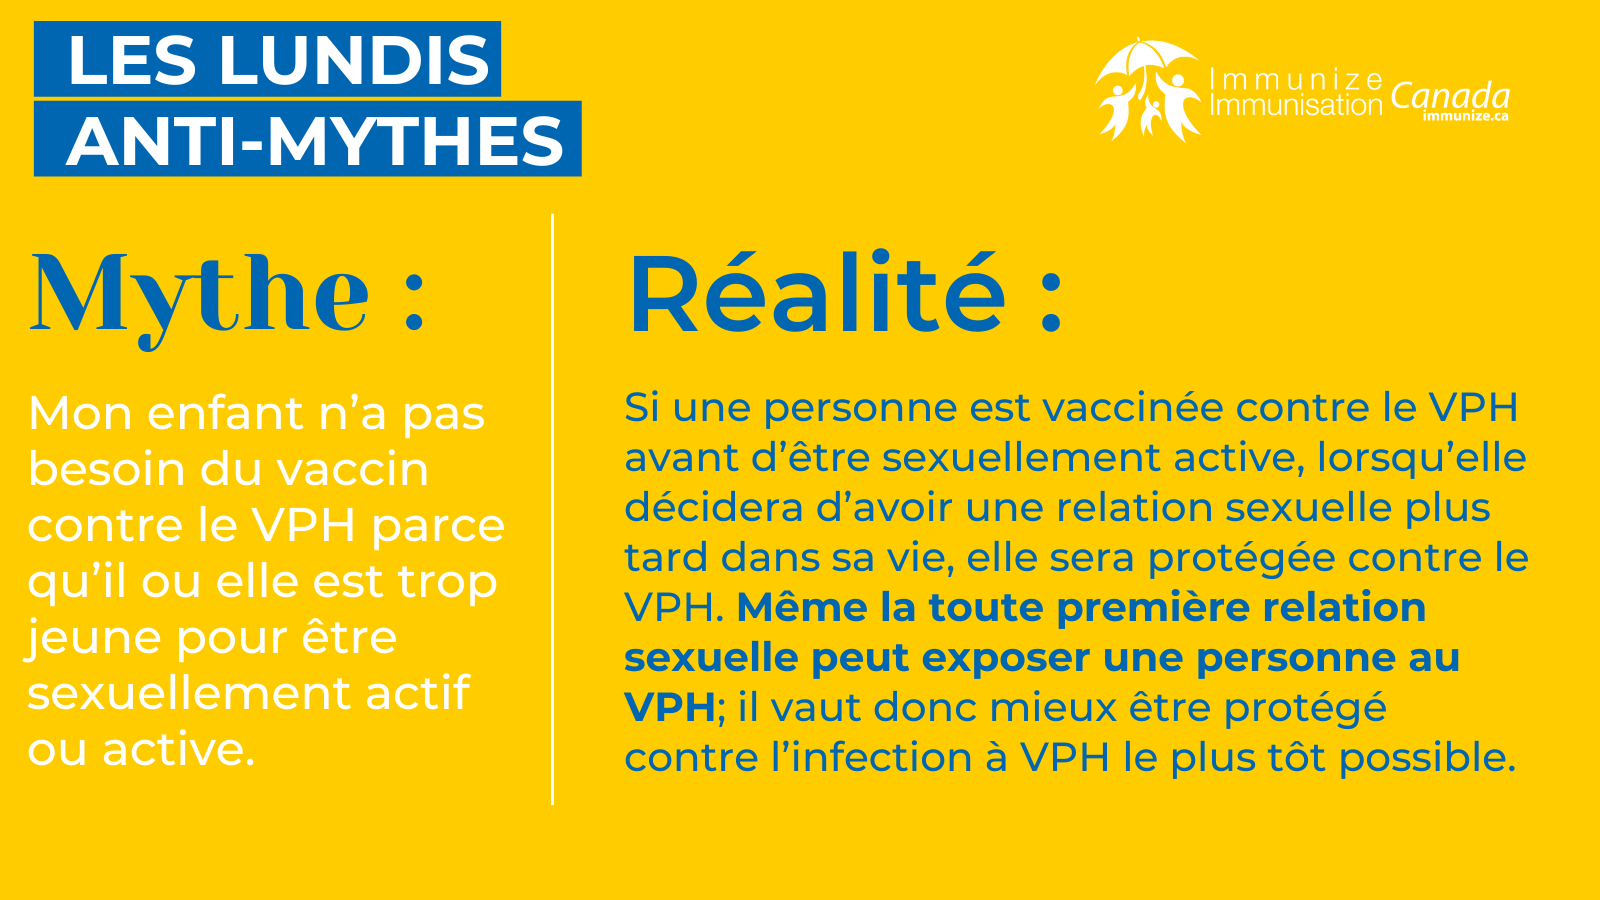 Lundis anti-mythes - image 1 pour Twitter